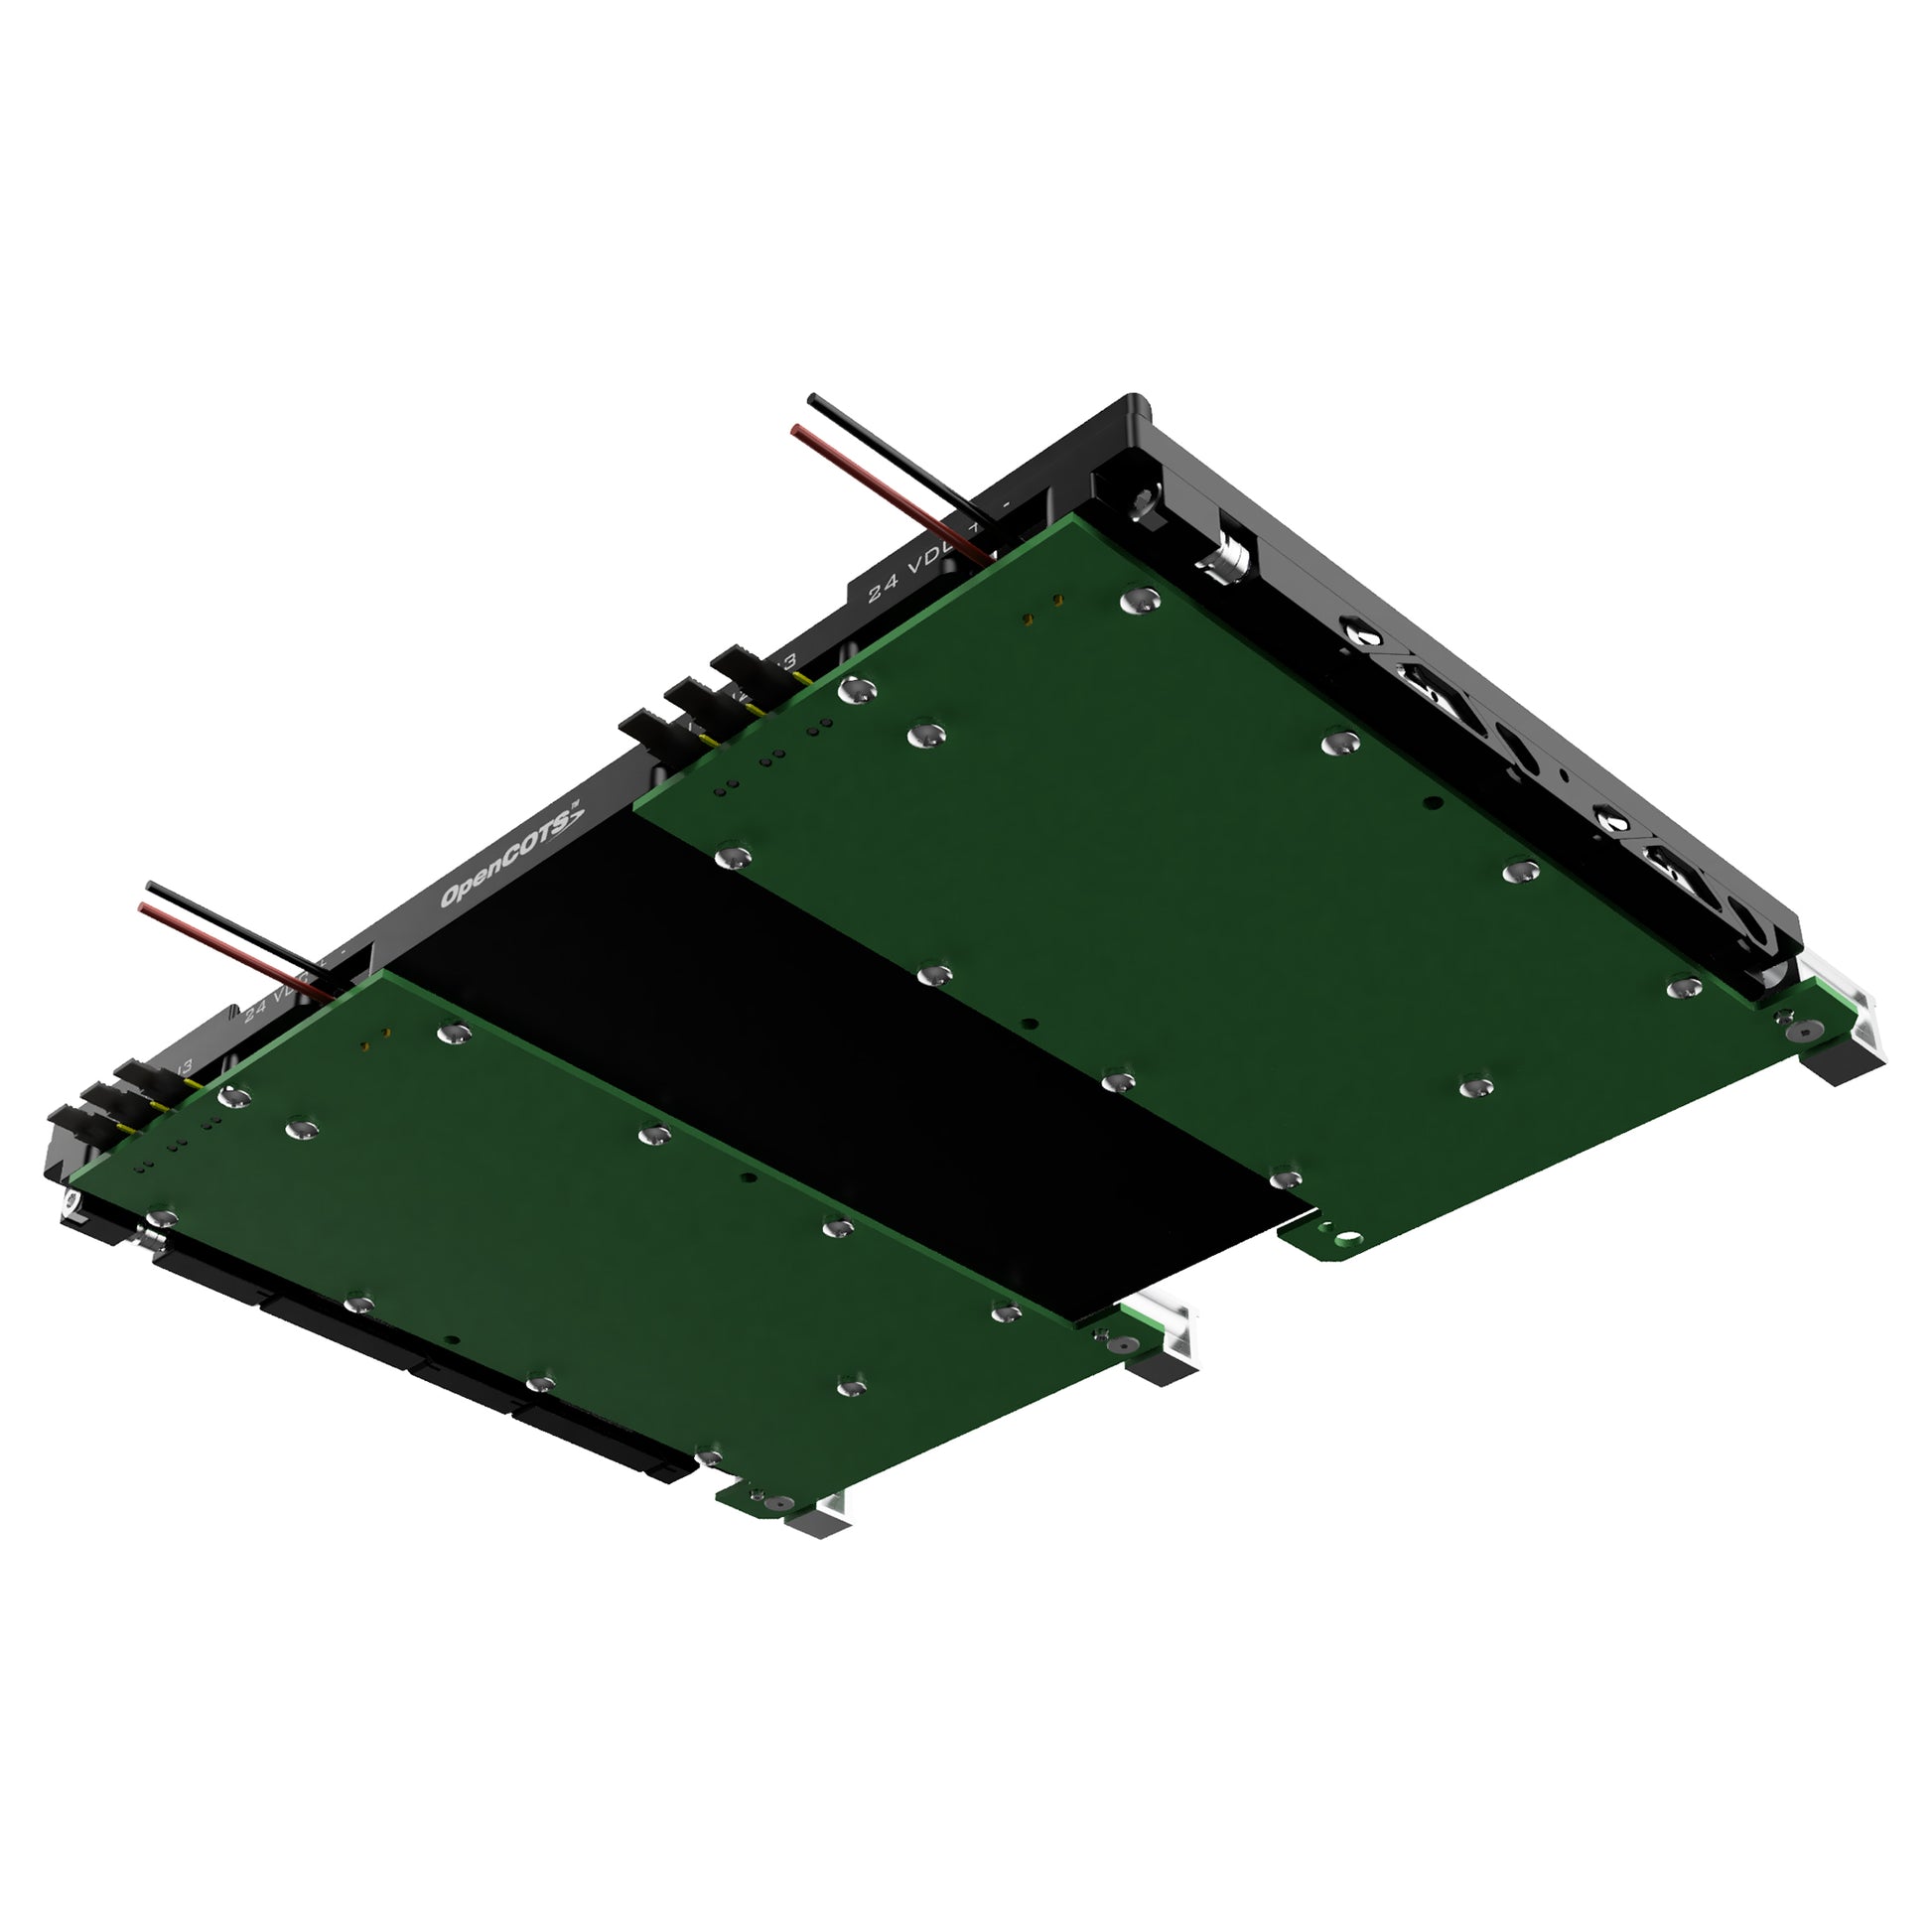 6U VPX Conduction Cooled Thermal Load Board Module, ruggedized PCB with metal enclosure 